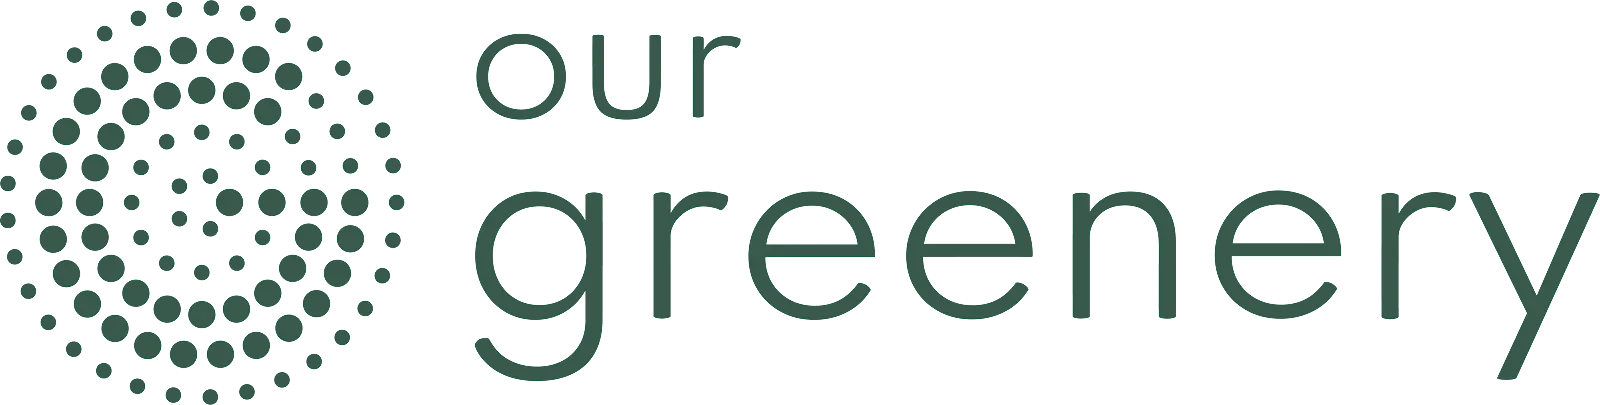 OUR GREENERY logo